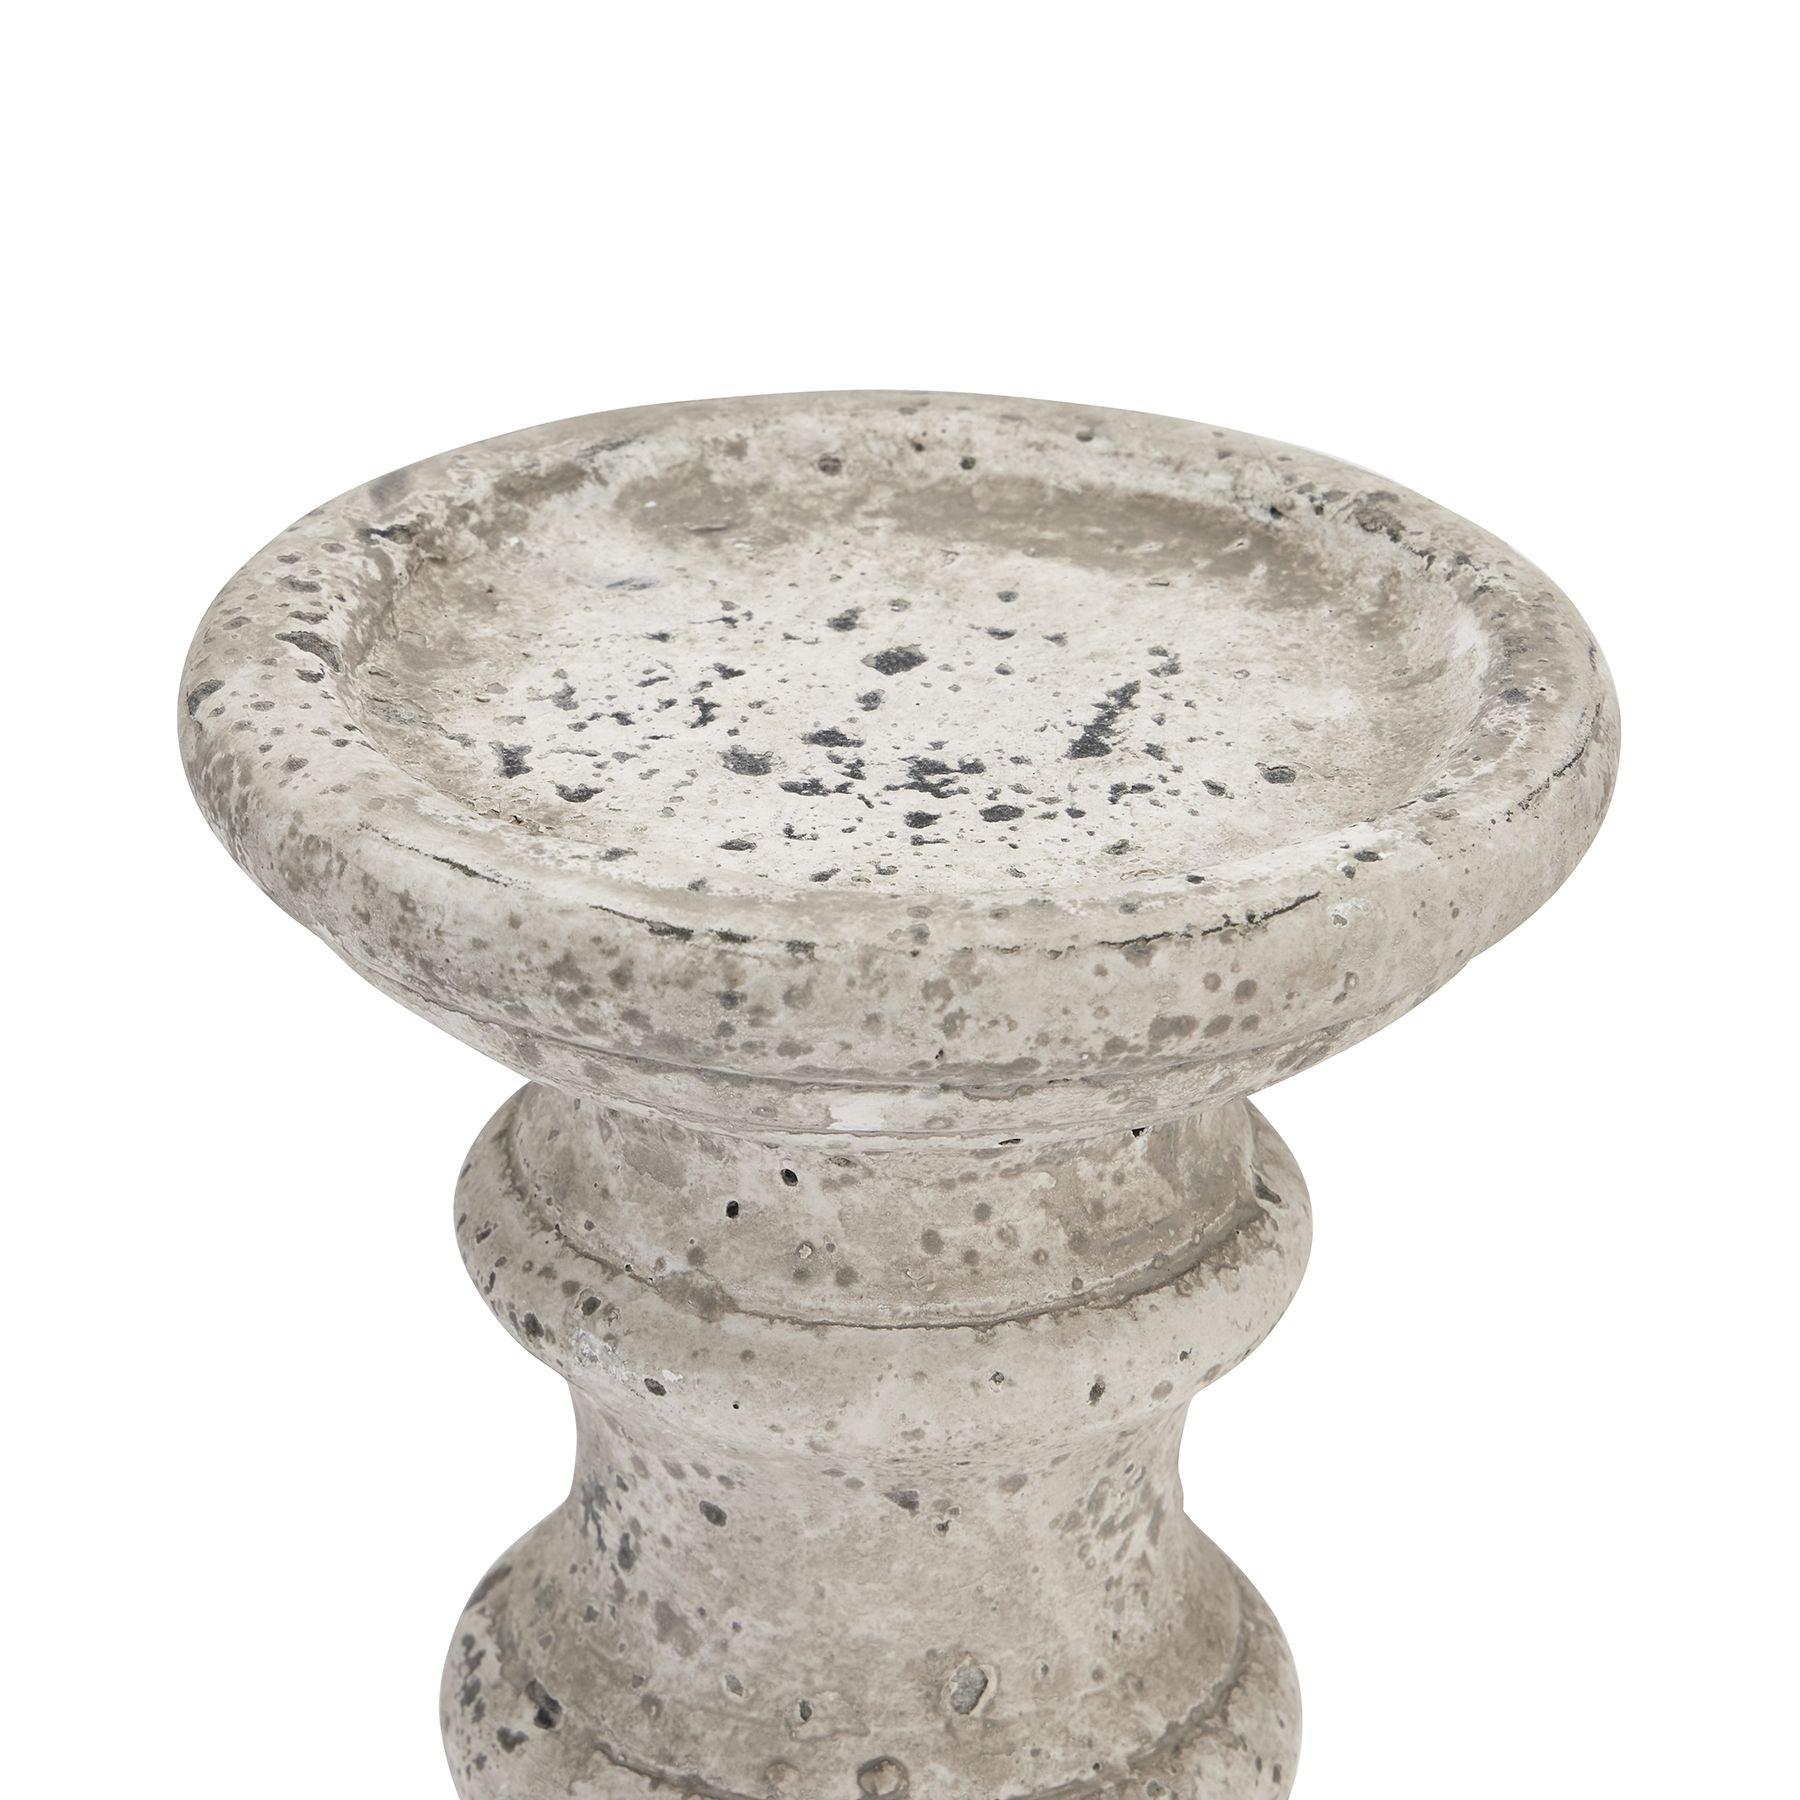 Stone Ceramic Column Candle Holder-Gifts & Accessories > Candle Holders > Ornaments